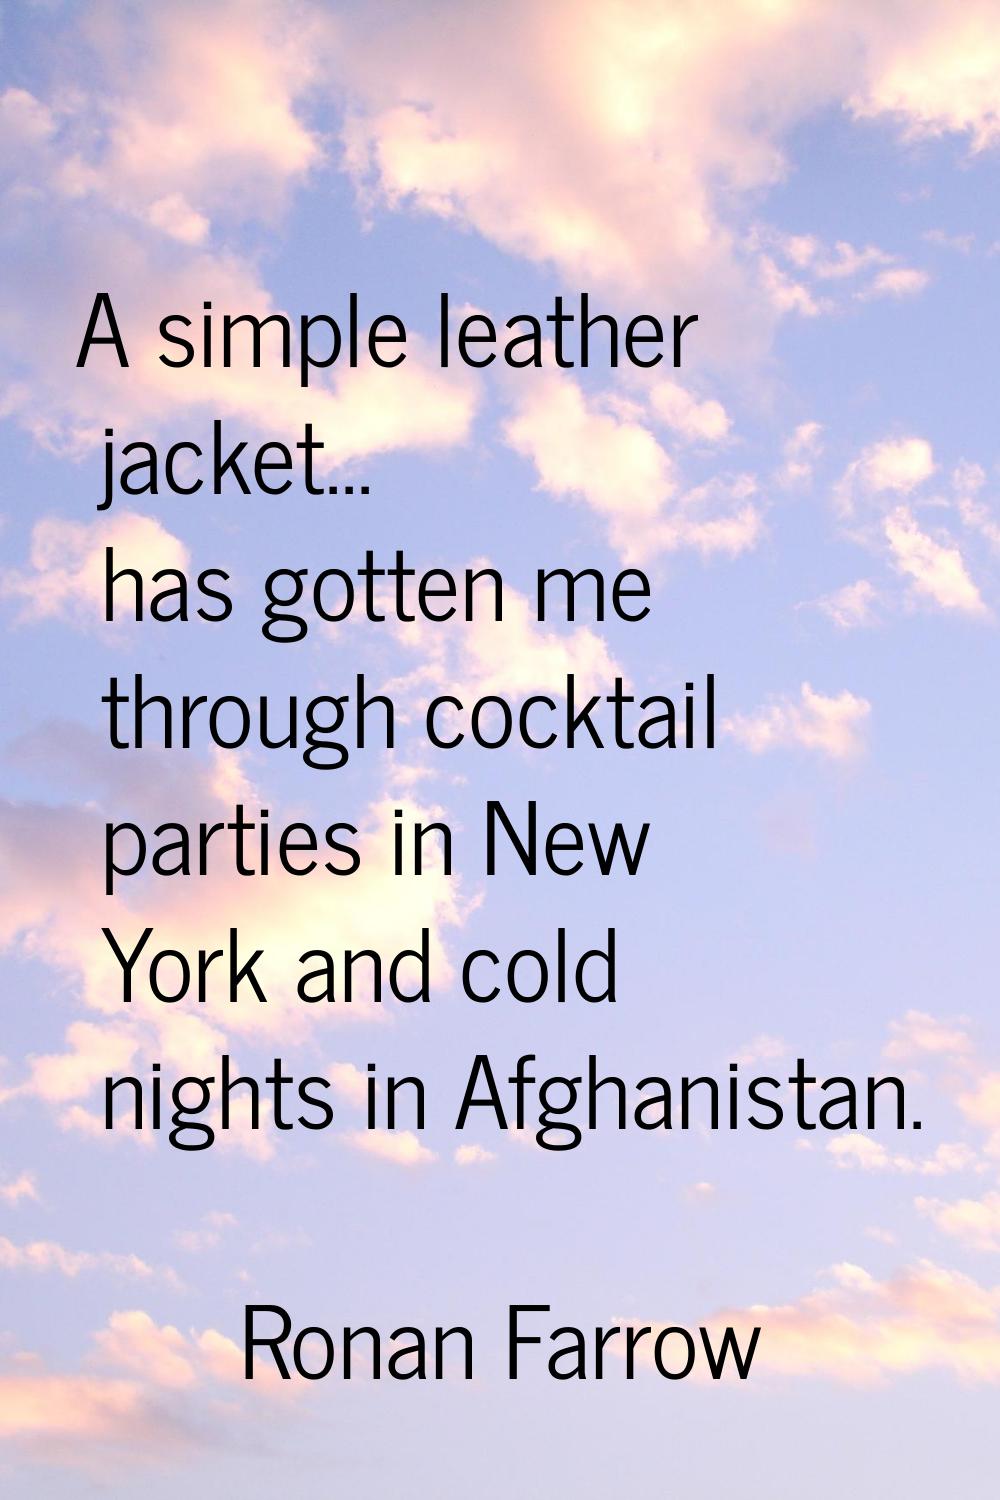 A simple leather jacket... has gotten me through cocktail parties in New York and cold nights in Af